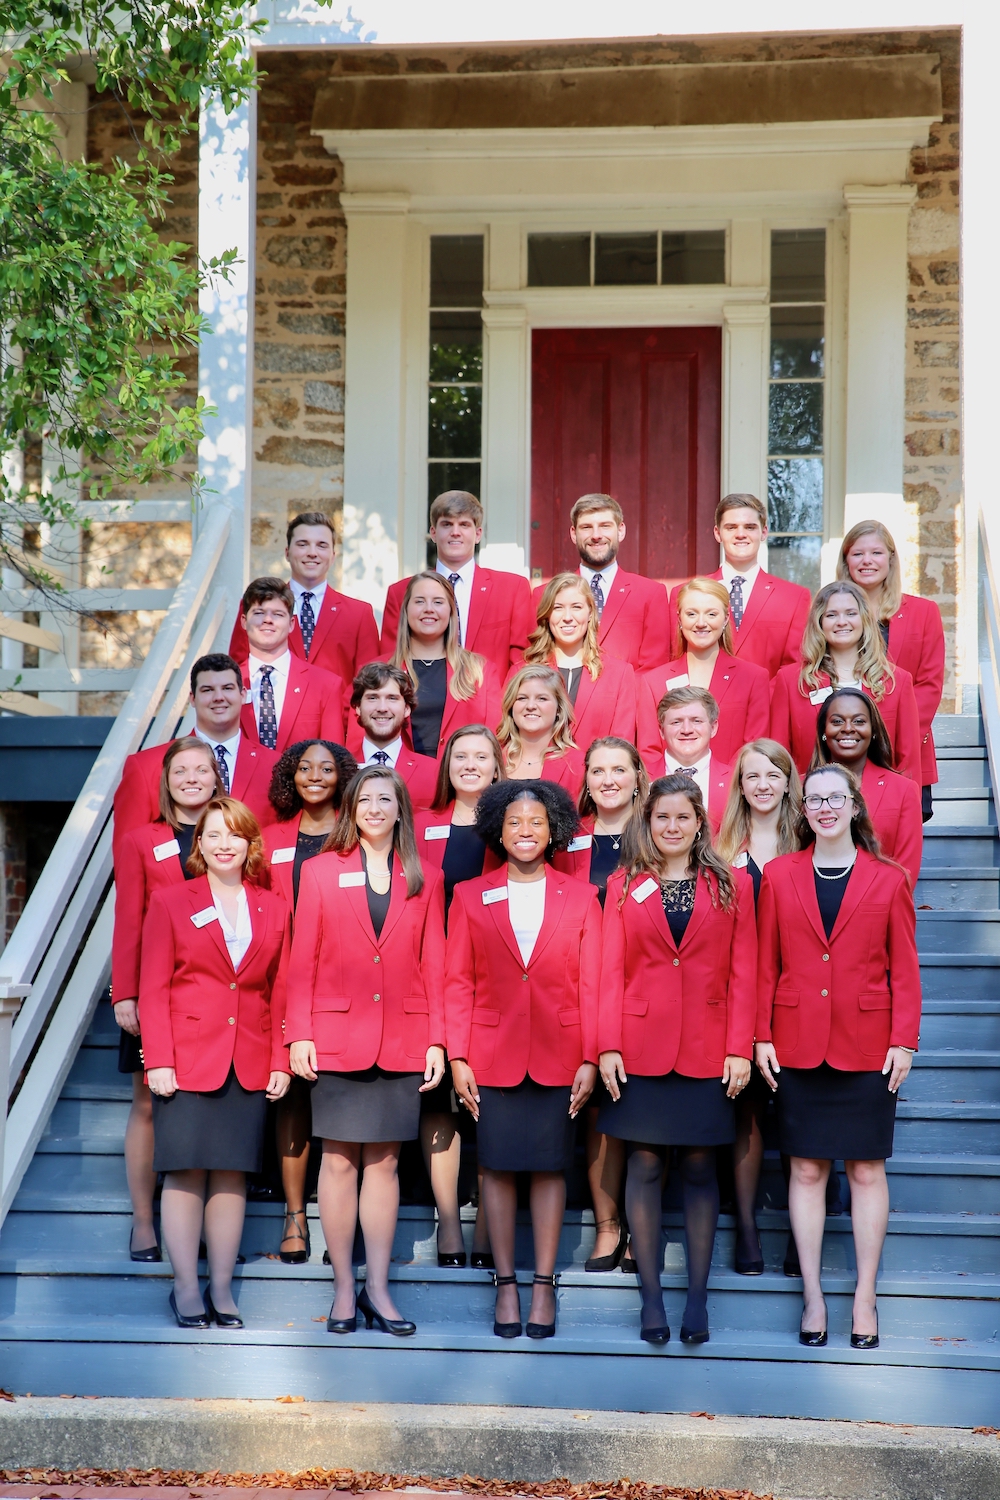 As the students at UGA College of Agricultural and Environmental Sciences start the fall semester, the 2019 CAES Ambassadors are ready to represent the college at college fairs and alumni events and help with logistics at college events.